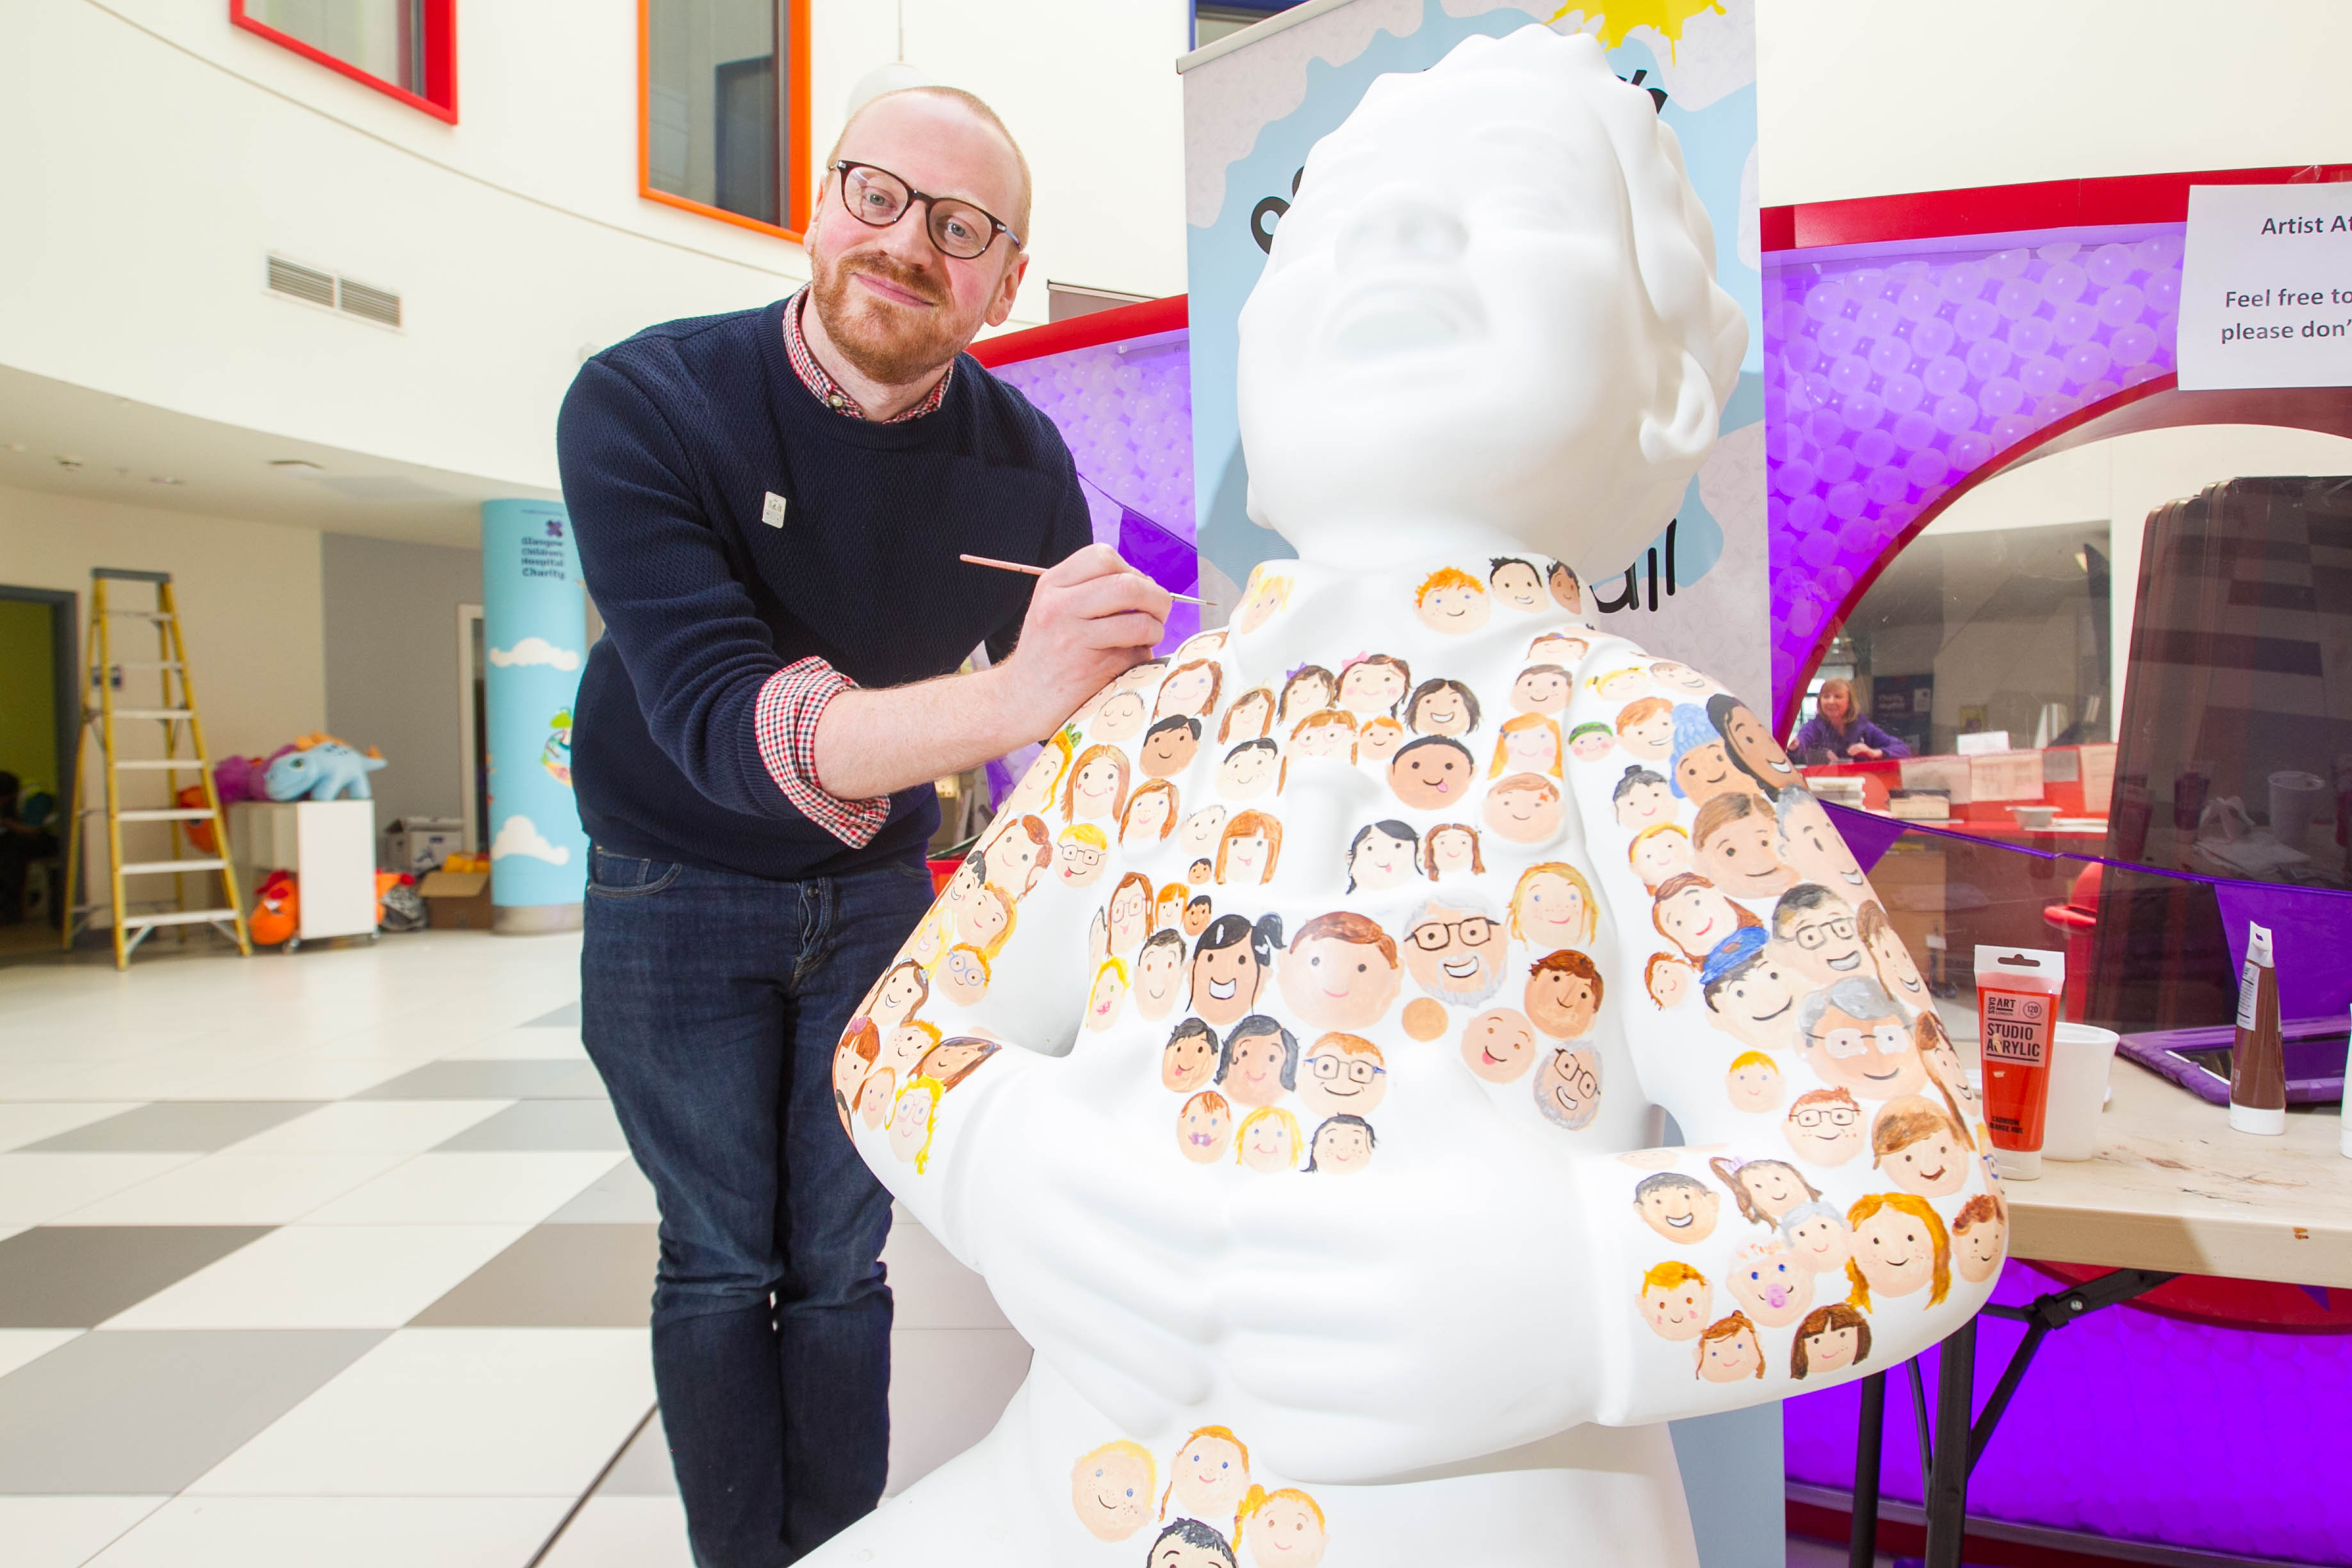 Cartoonist Neil Slorance is one of the artists that has designed an Oor Wullie for the Bucket Trail. Neil has been drawing patients and workers at Glasgow's Children's Hospital onto the statue